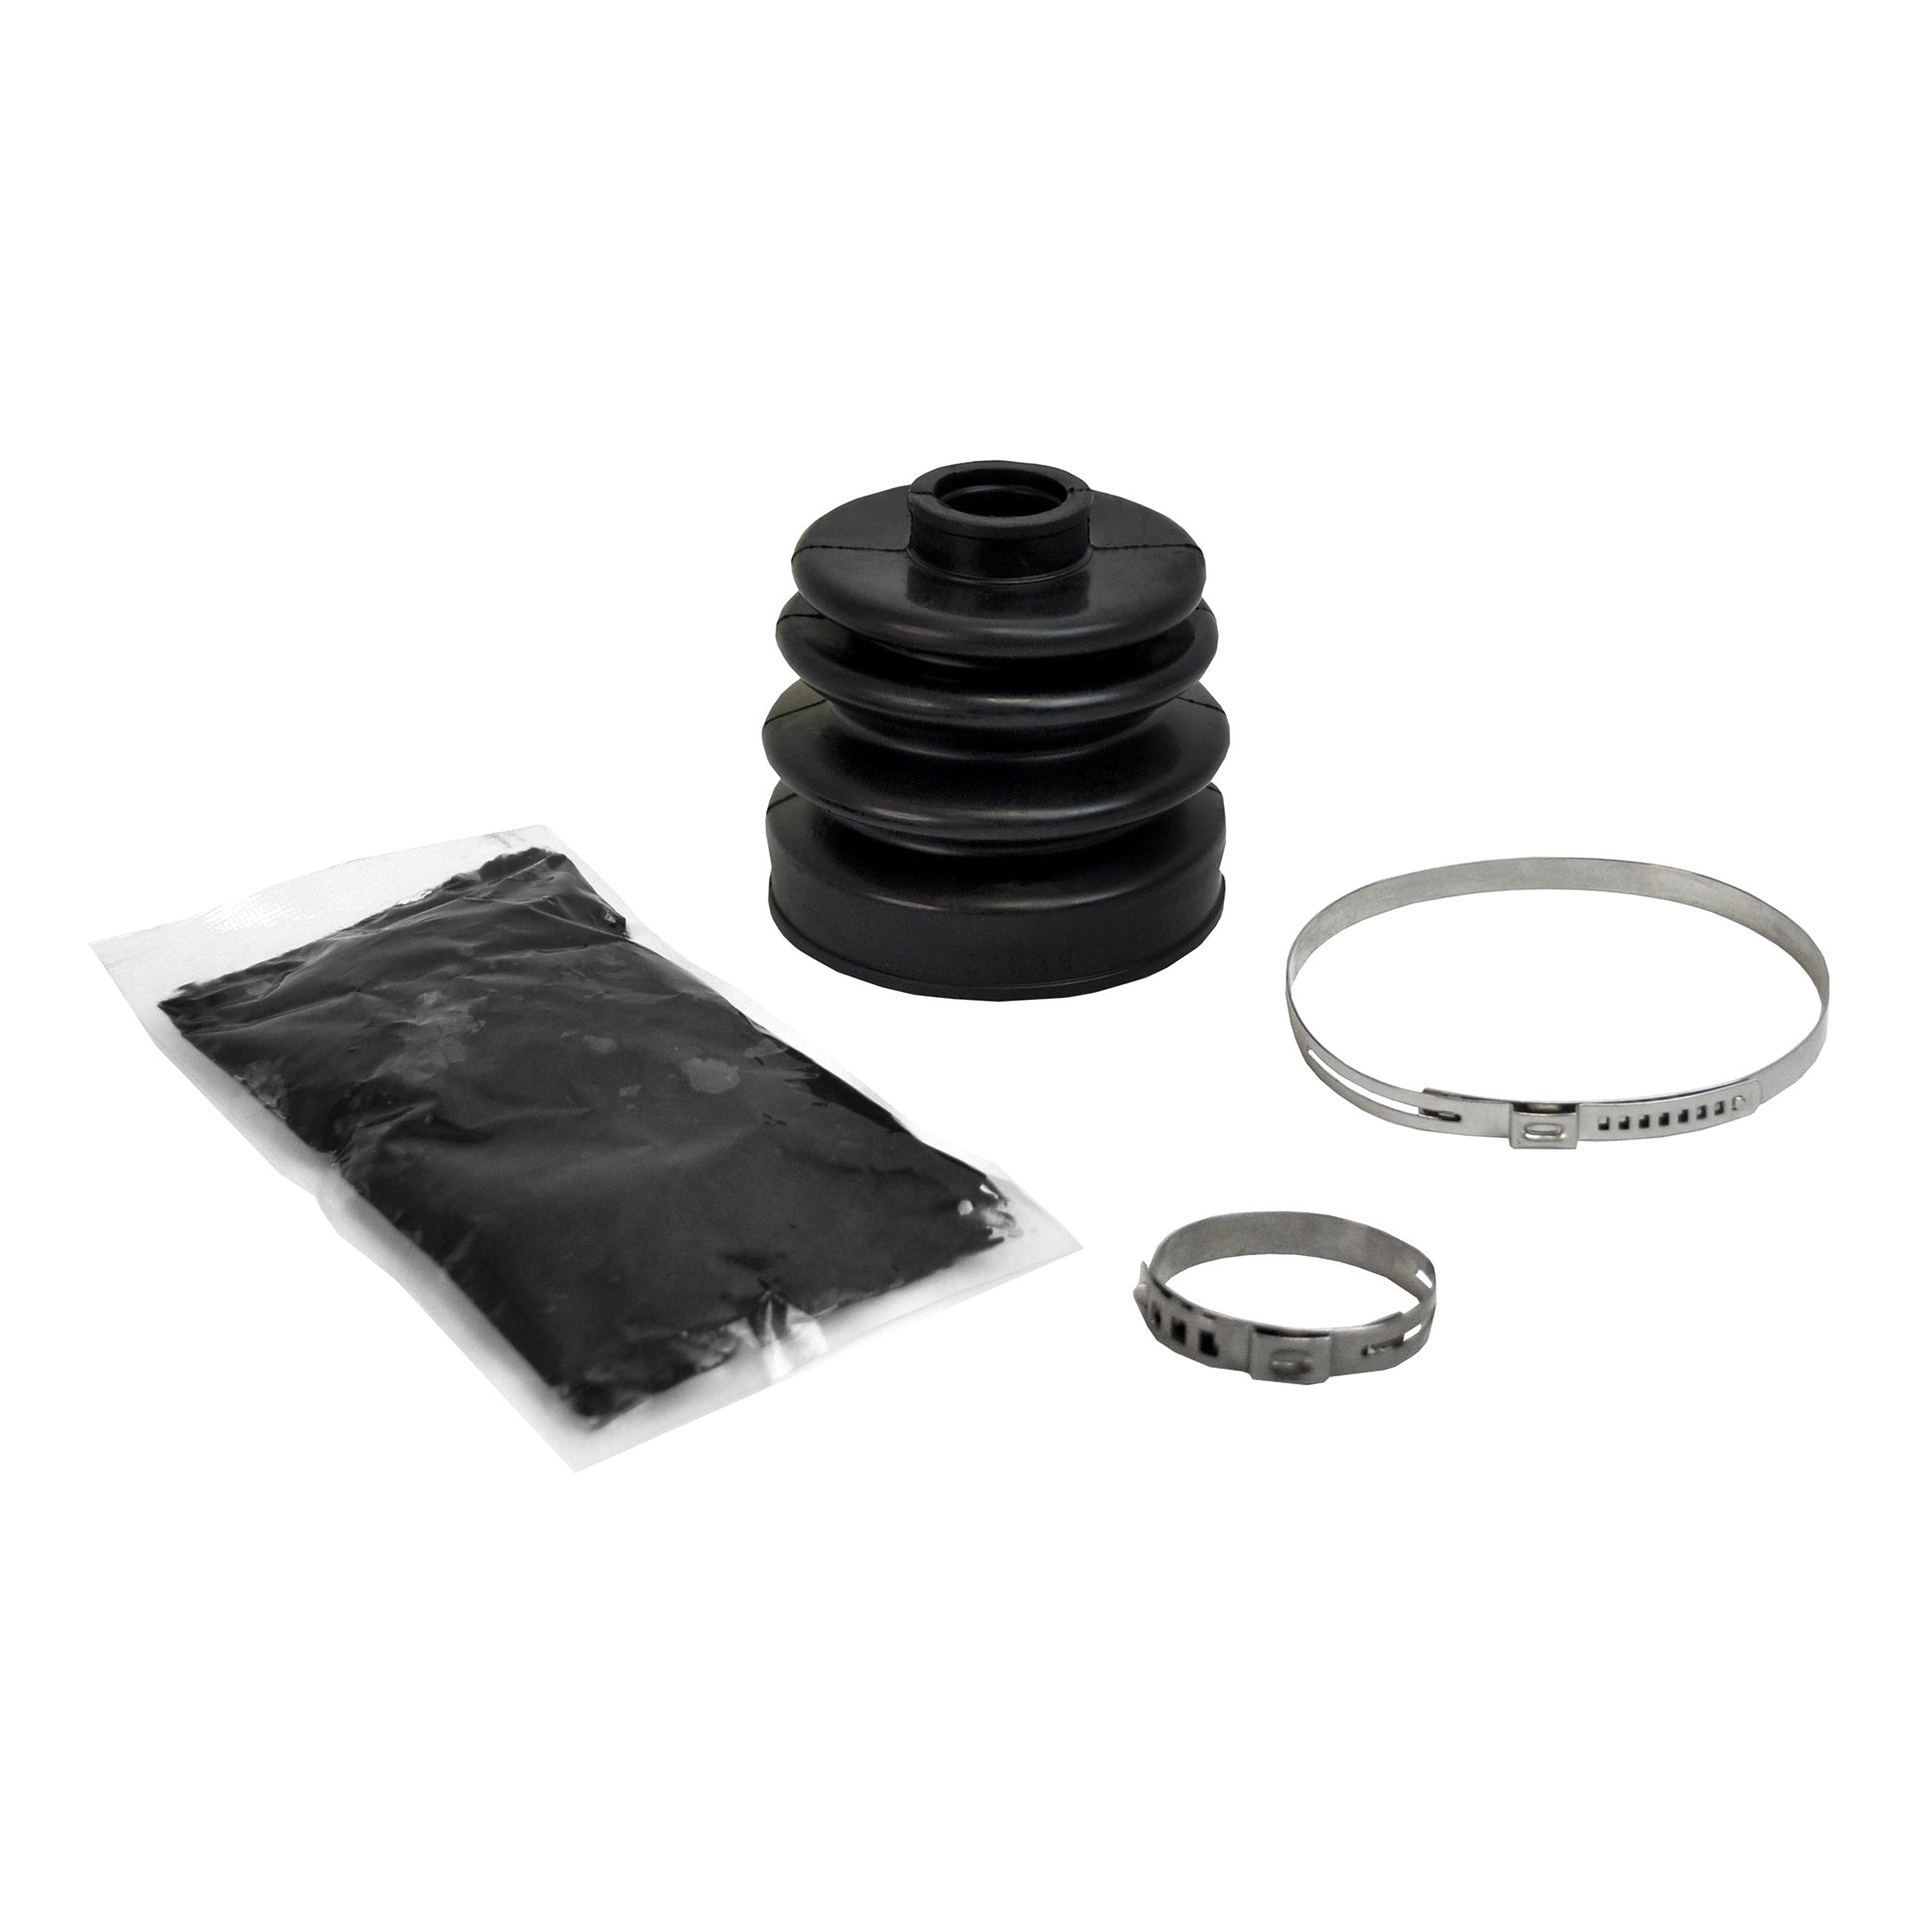 Polaris Xpedition 325 Rugged OE Replacement Boot Kit